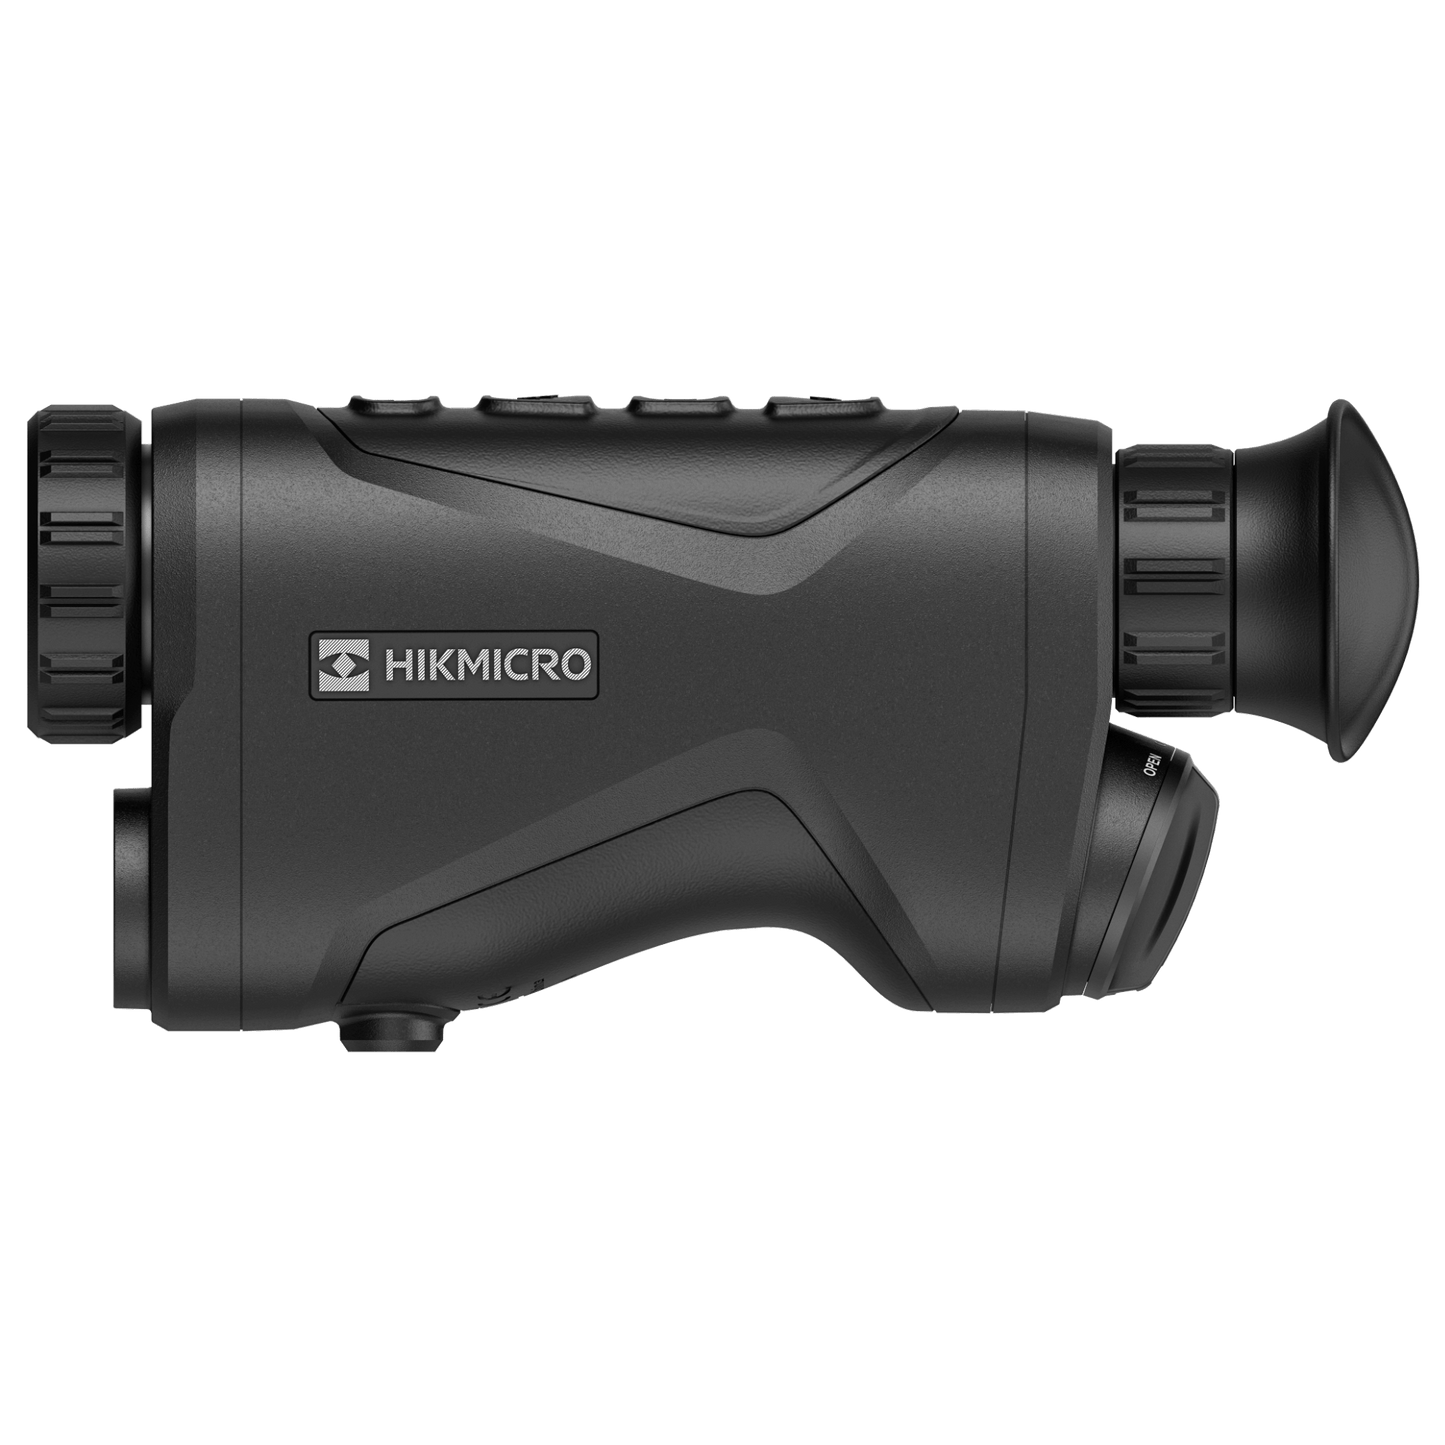 Side profile of the CH25L Thermal Monocular with RangeFinder, showcasing its ergonomic design and branding